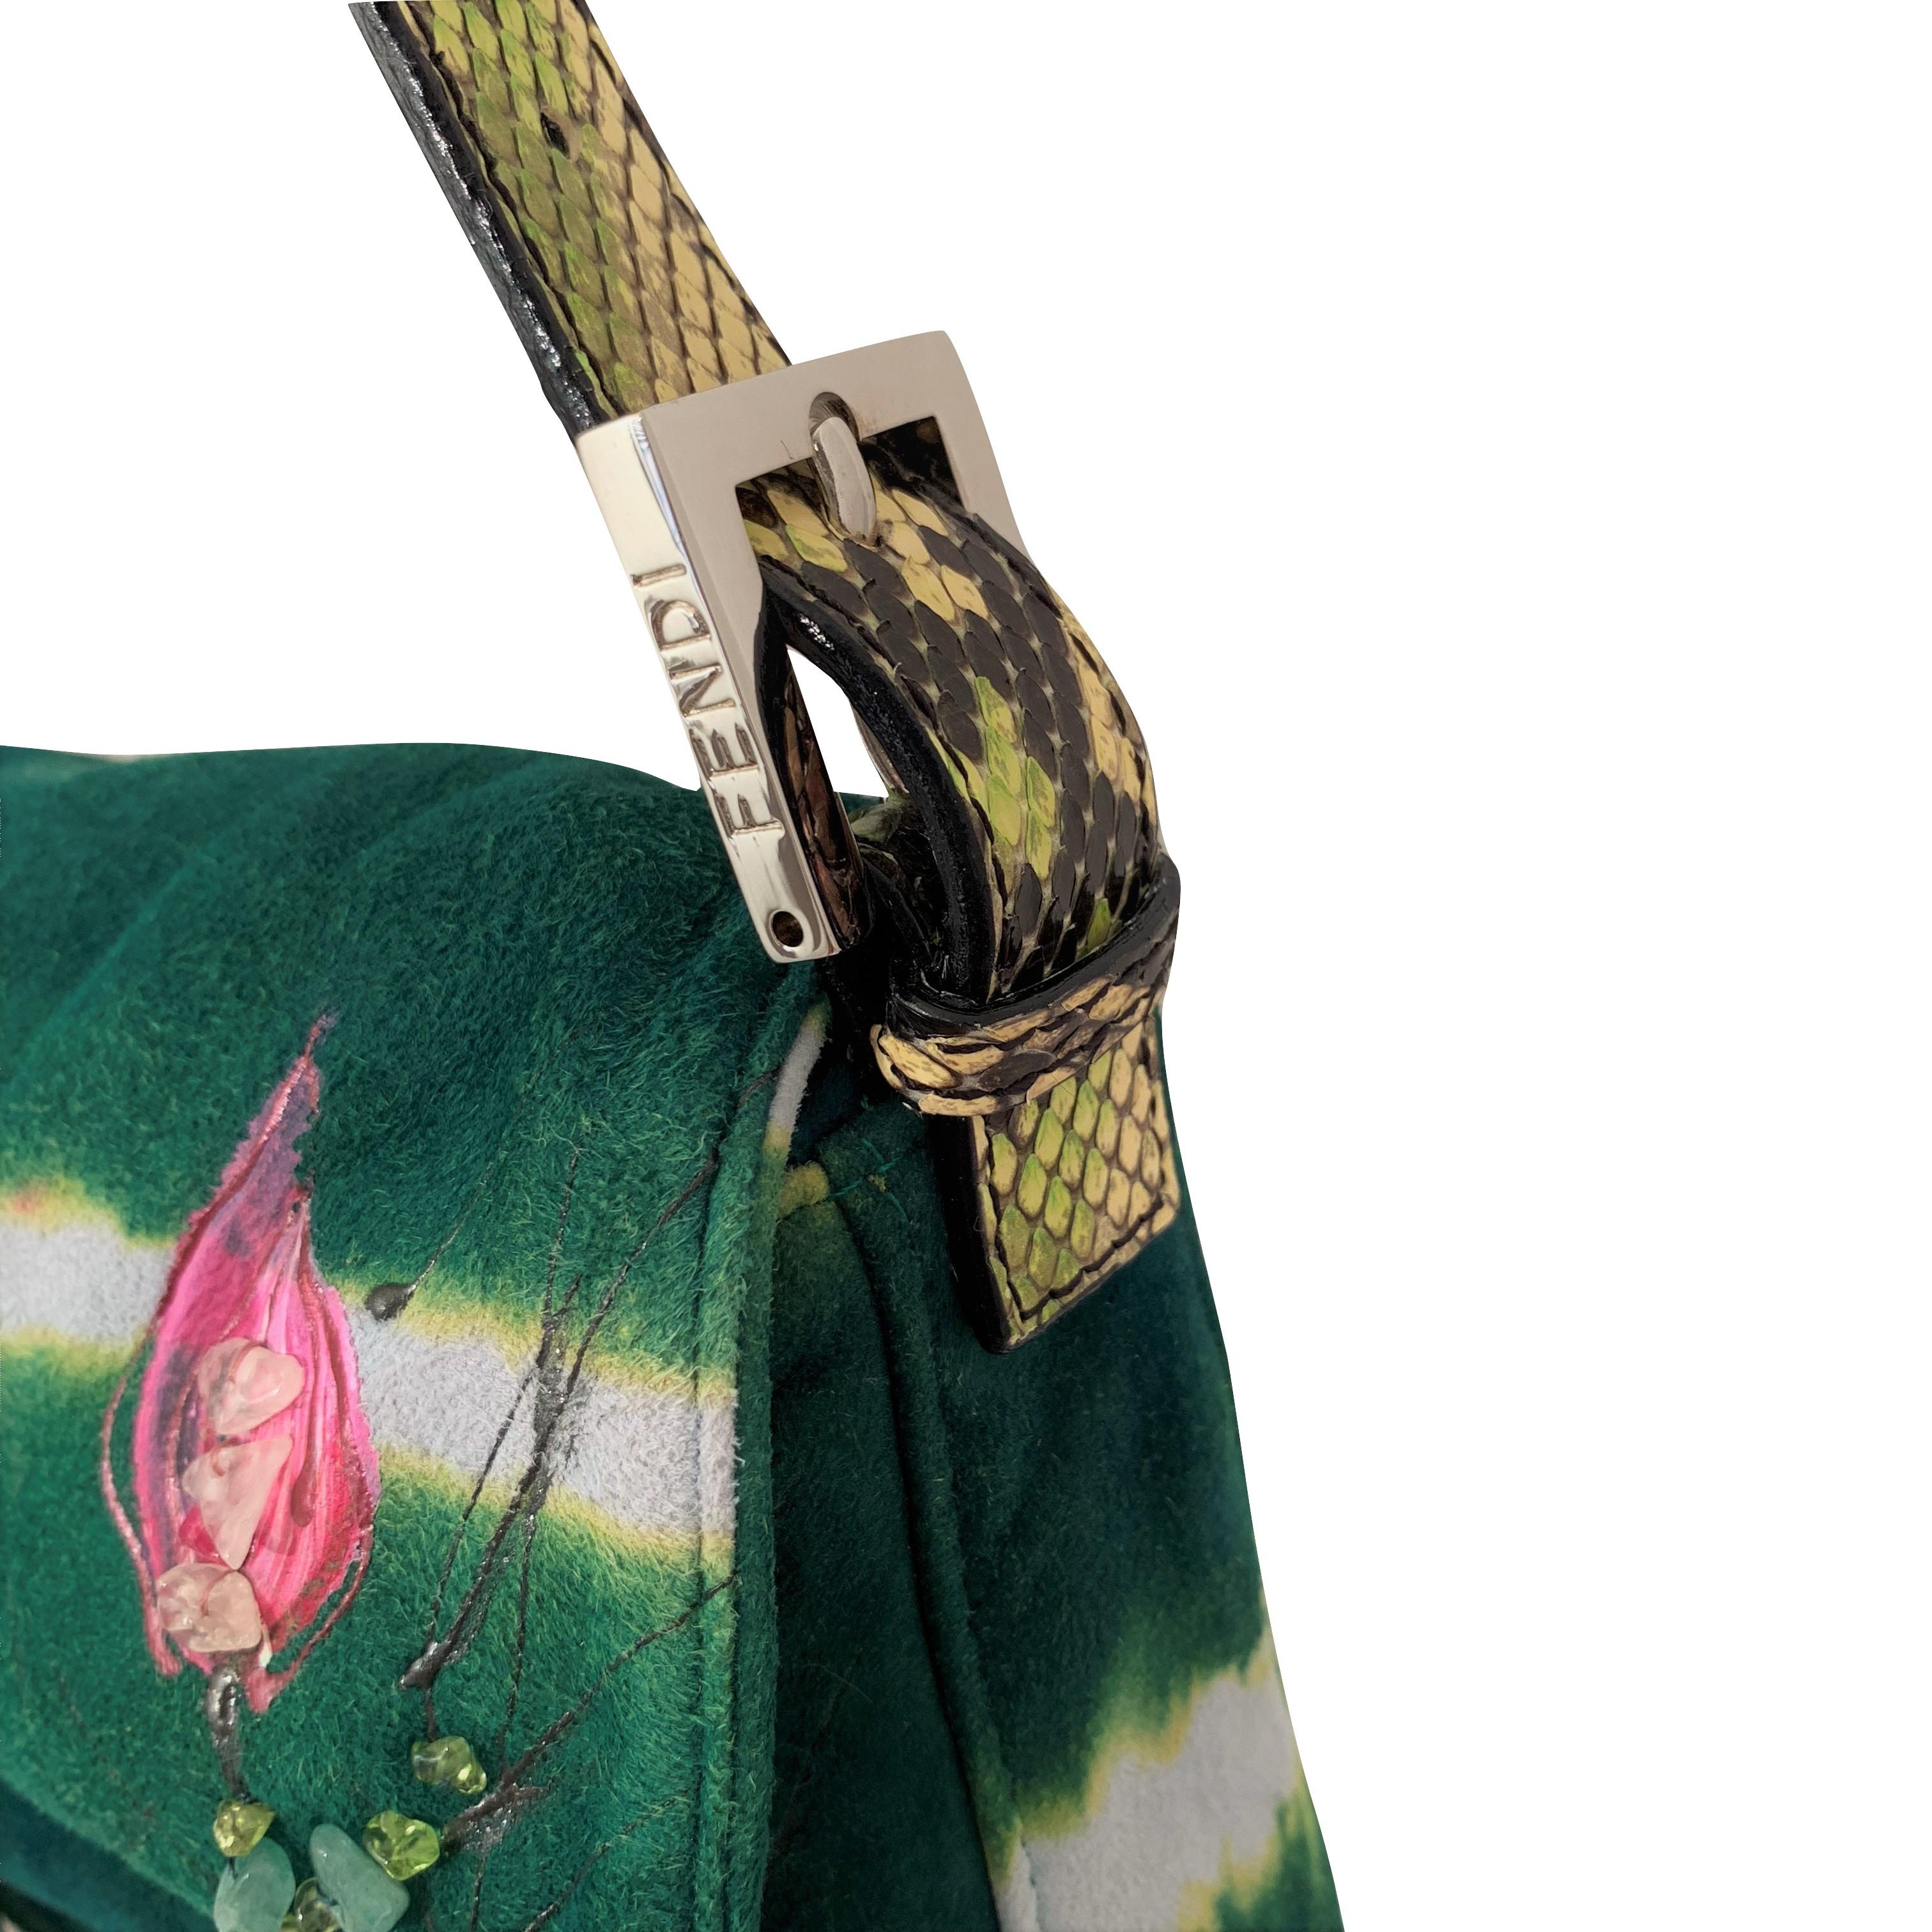 New Fendi Hand Painted Python Bag Featured in the 15th Anniversary Baguette Book 2